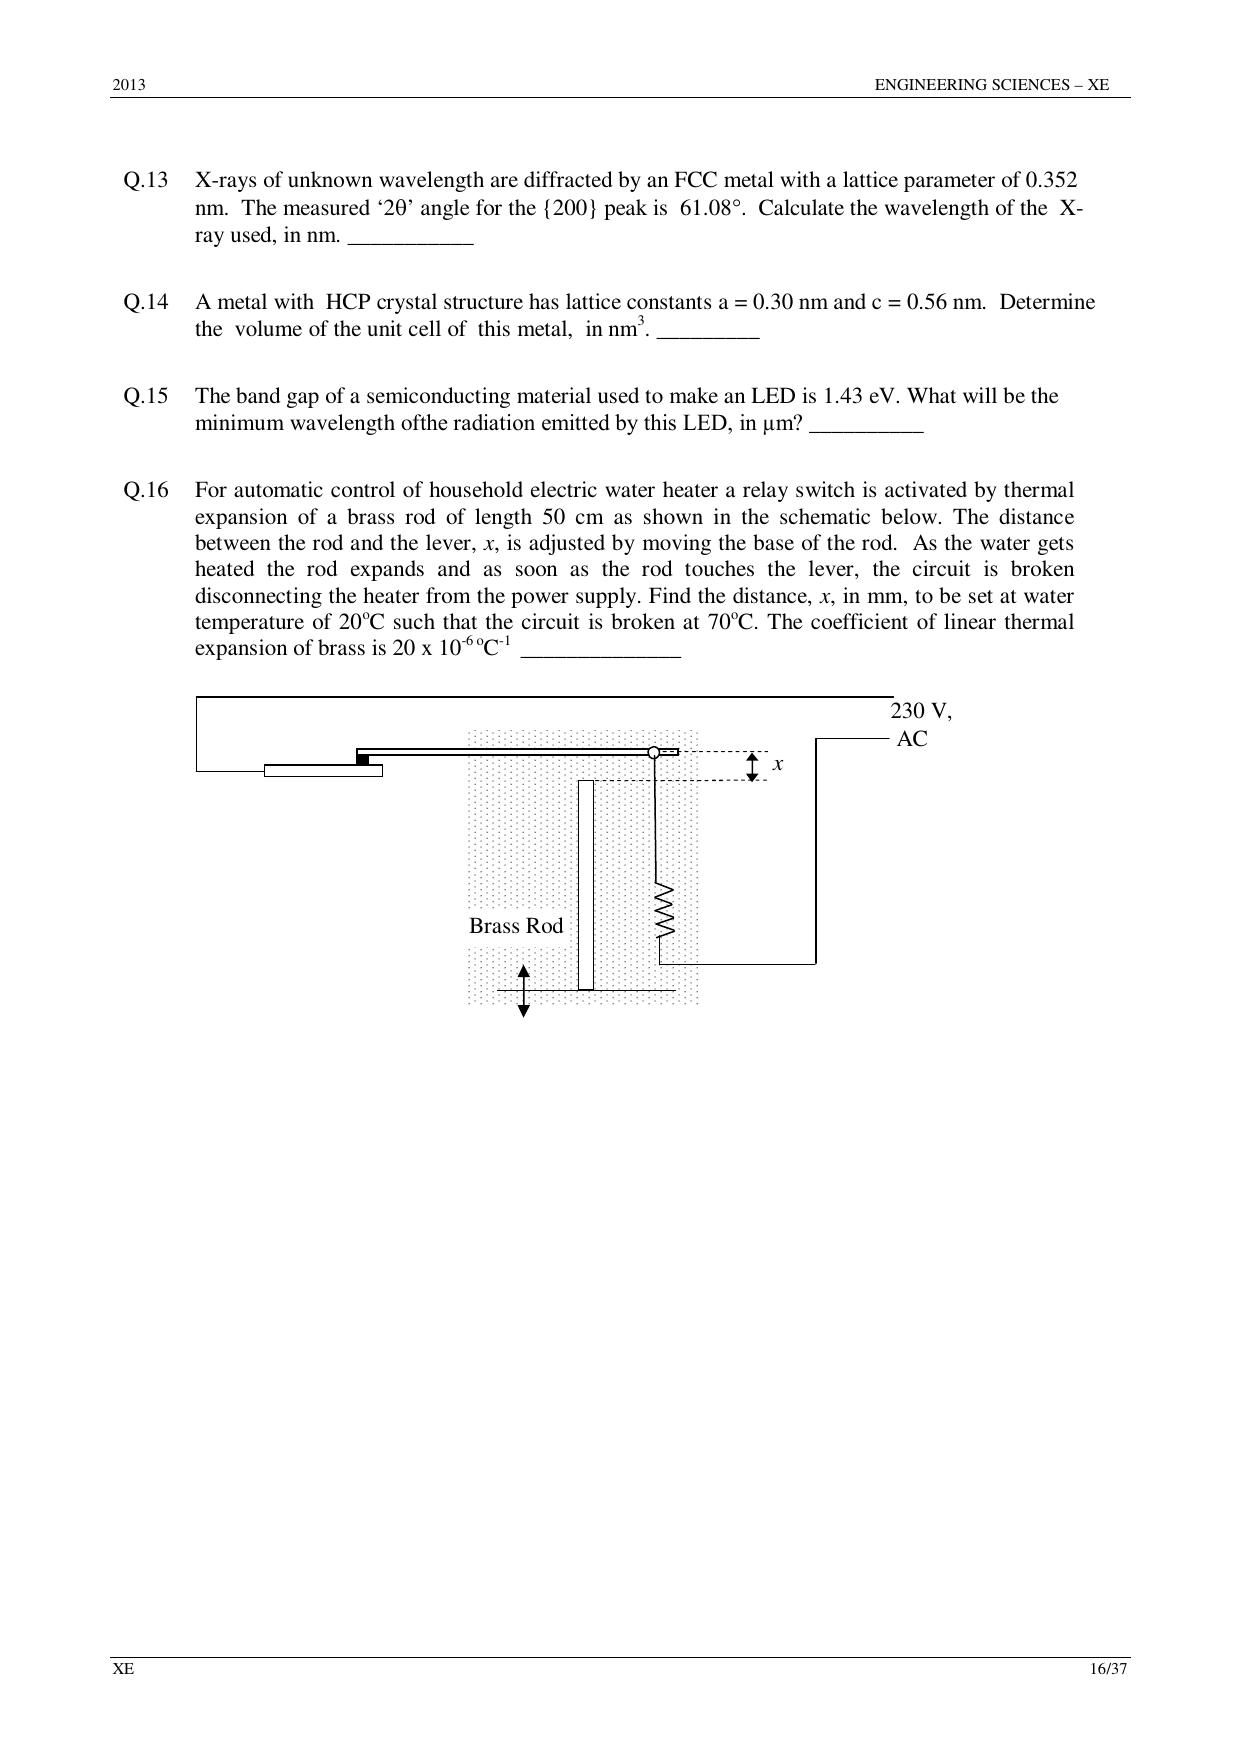 GATE 2013 Engineering Sciences (XE) Question Paper with Answer Key - Page 16